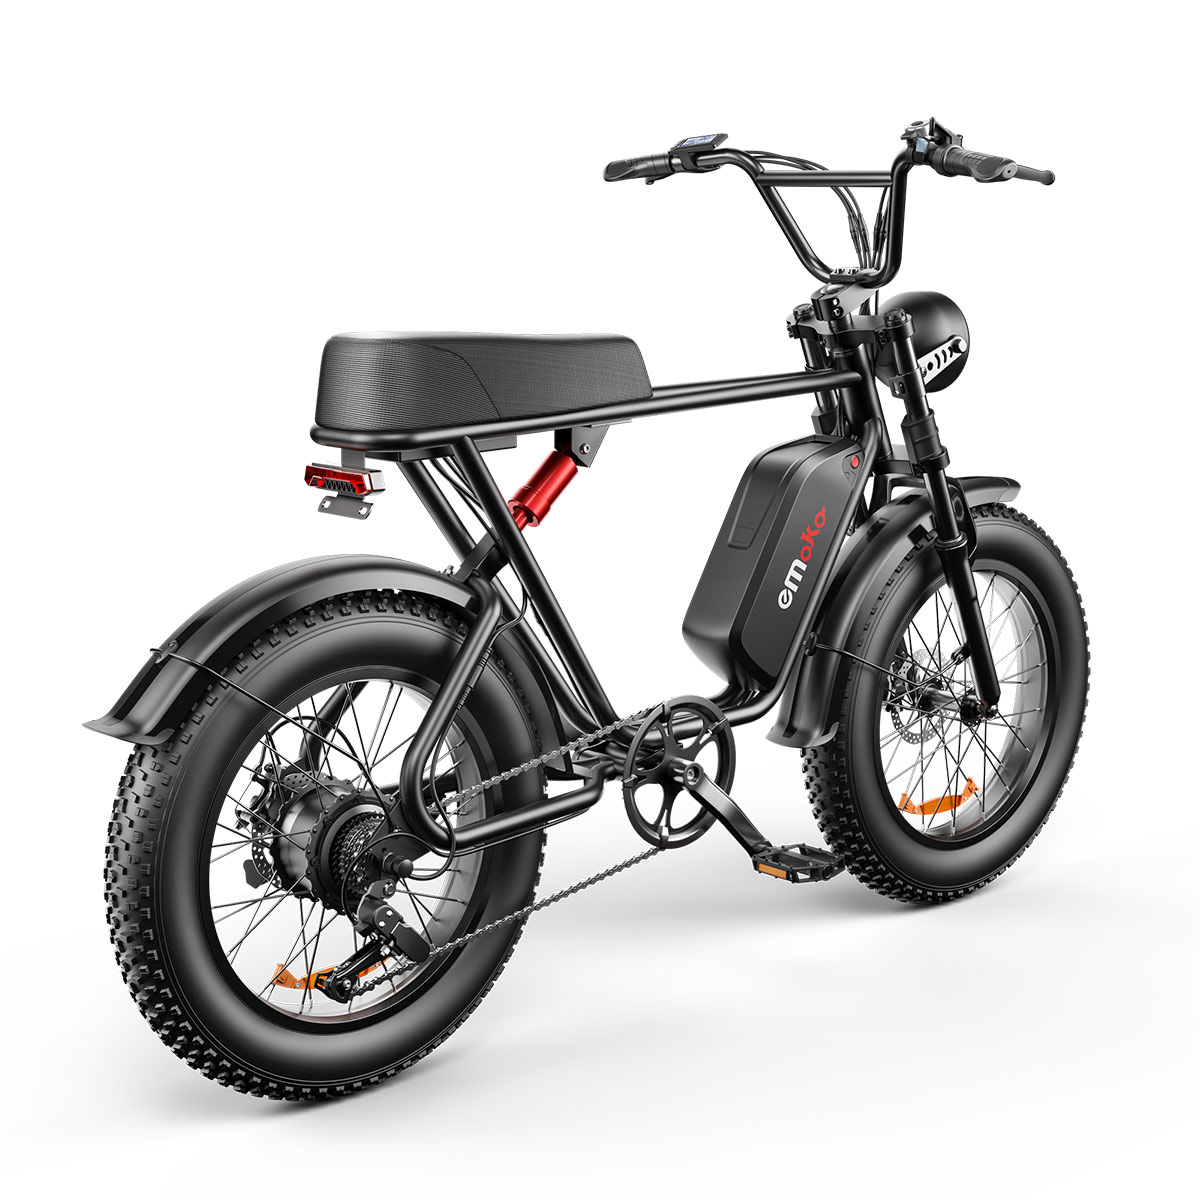 [USA DIRECT] Emoko C91 Electric Bike 48V 20Ah Battery 1000W Motor 20*4.0Inch Tires 55-70KM Max Mileage 150KG Max Load Electric Bicycle COD